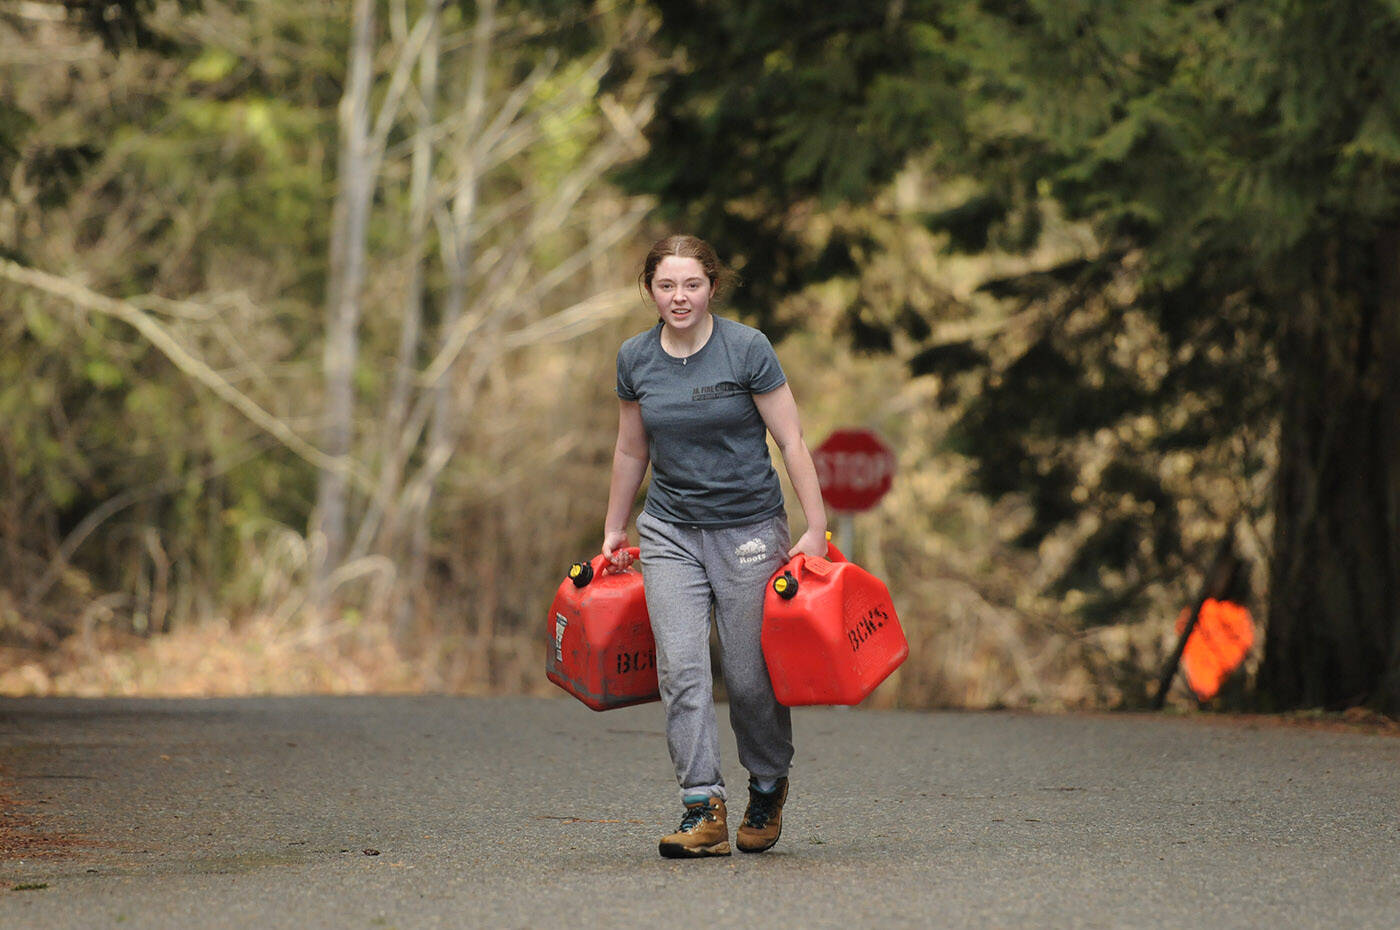 Talia Coward carries jerry cans during an obstacle course on the last day of the Junior Fire Crew work experience program at BC Wildfire Services Cultus Lake Fire Base on Saturday, March 25, 2023. (Jenna Hauck/ Chilliwack Progress)